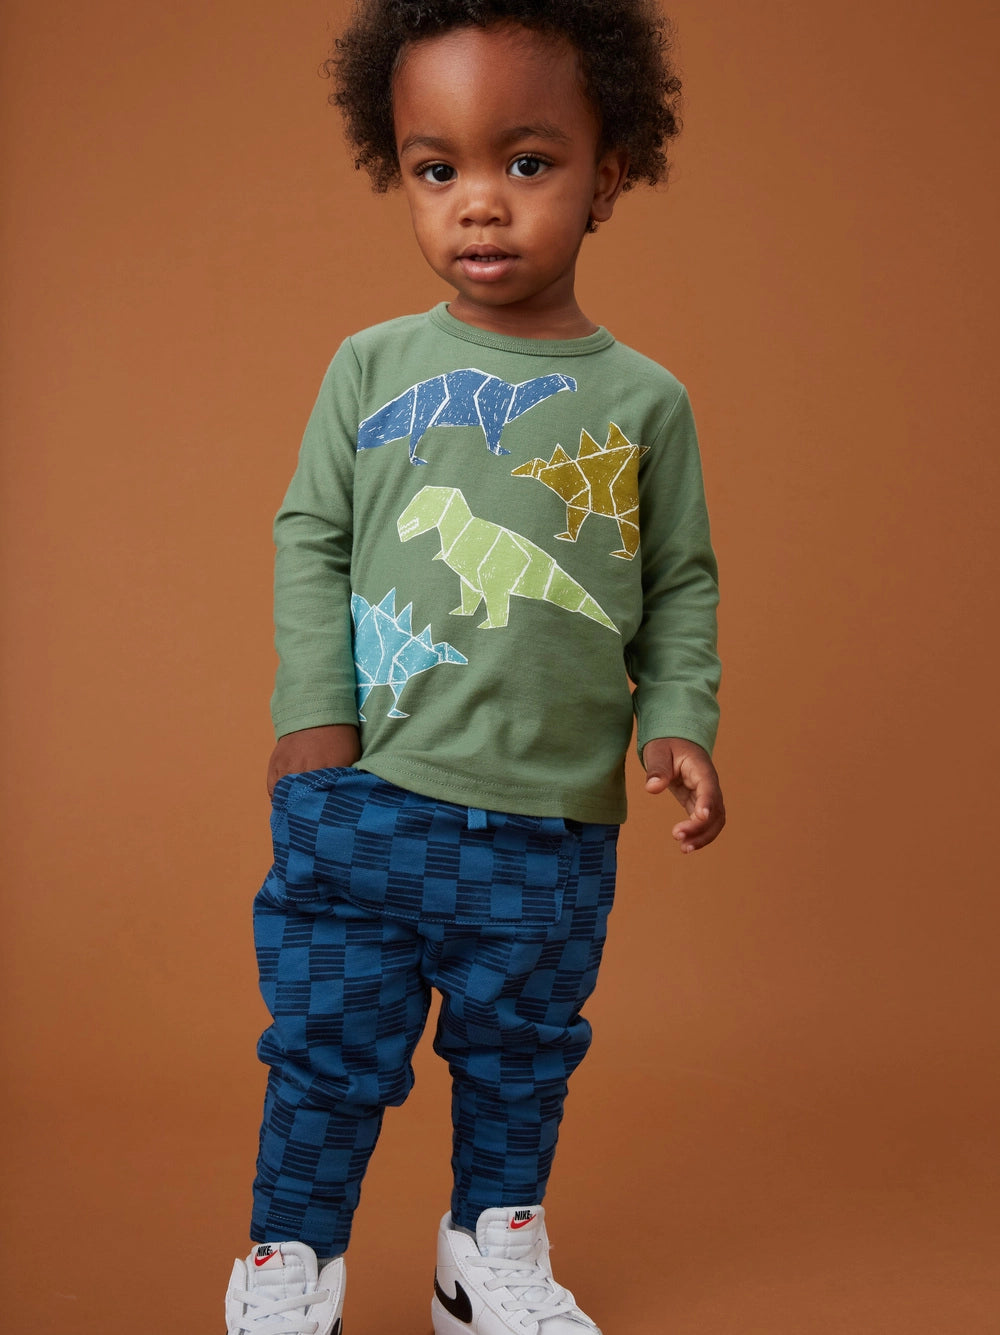 Tee (Long Sleeve) - Dino Friends (Baby + Toddler Only)